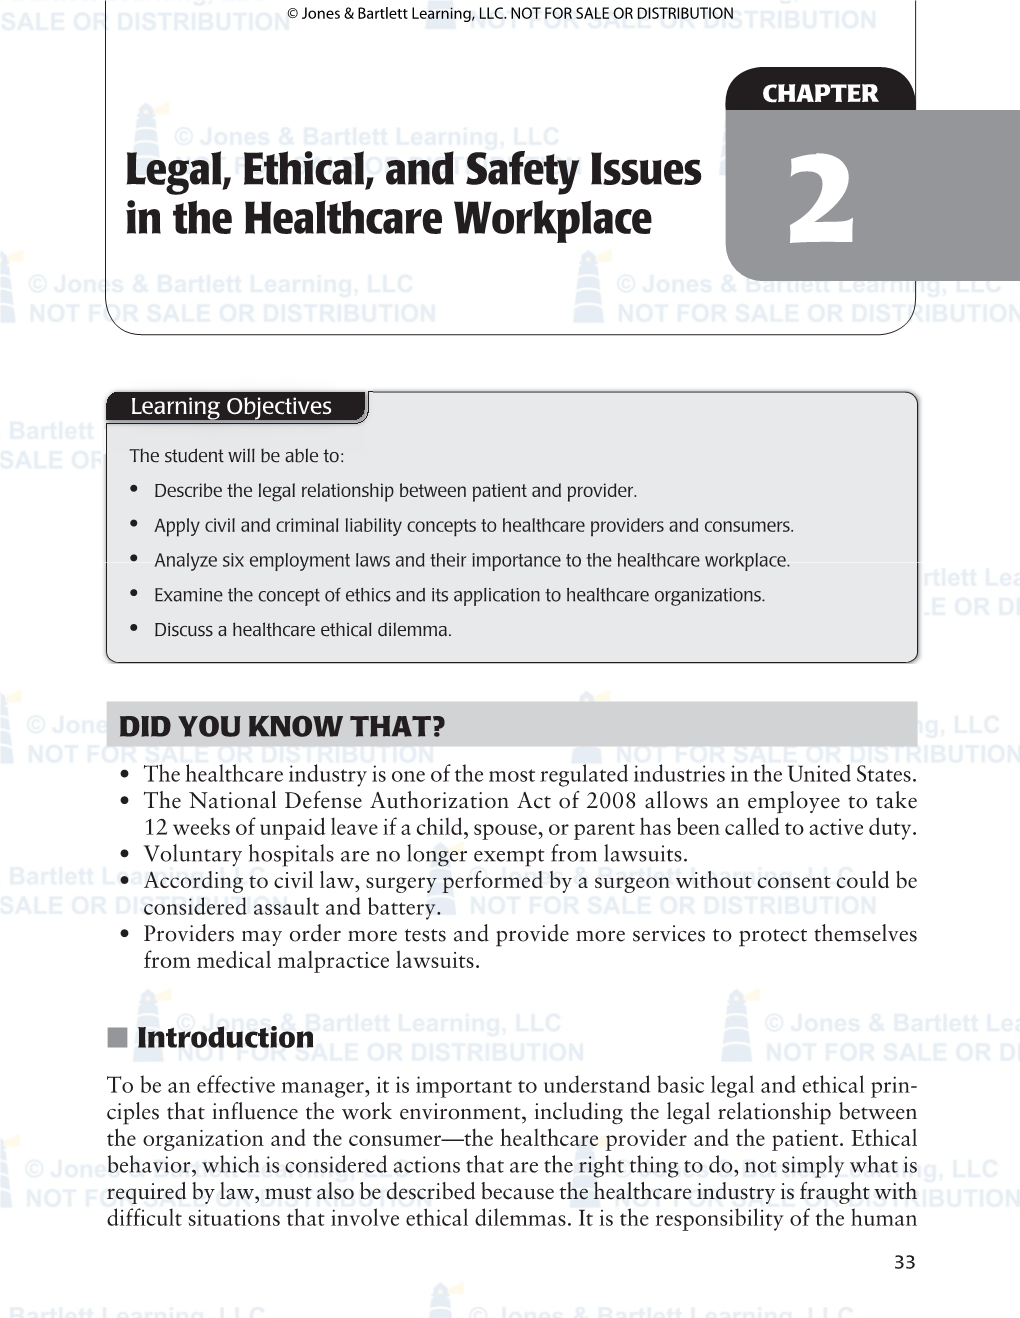 Legal, Ethical, and Safety Issues in the Healthcare Workplace 2